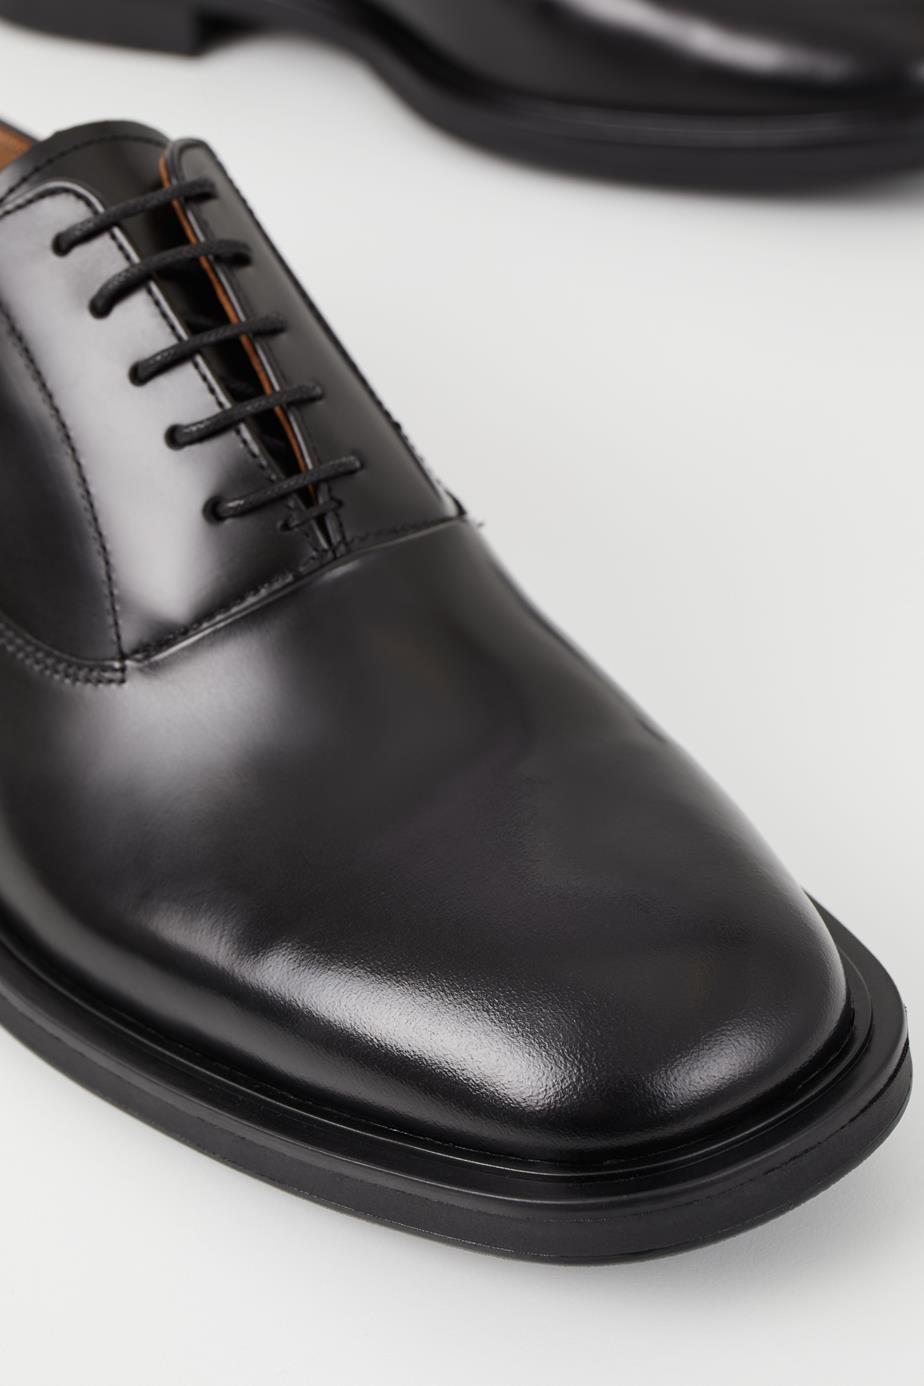 Andrew shoes Black polished leather